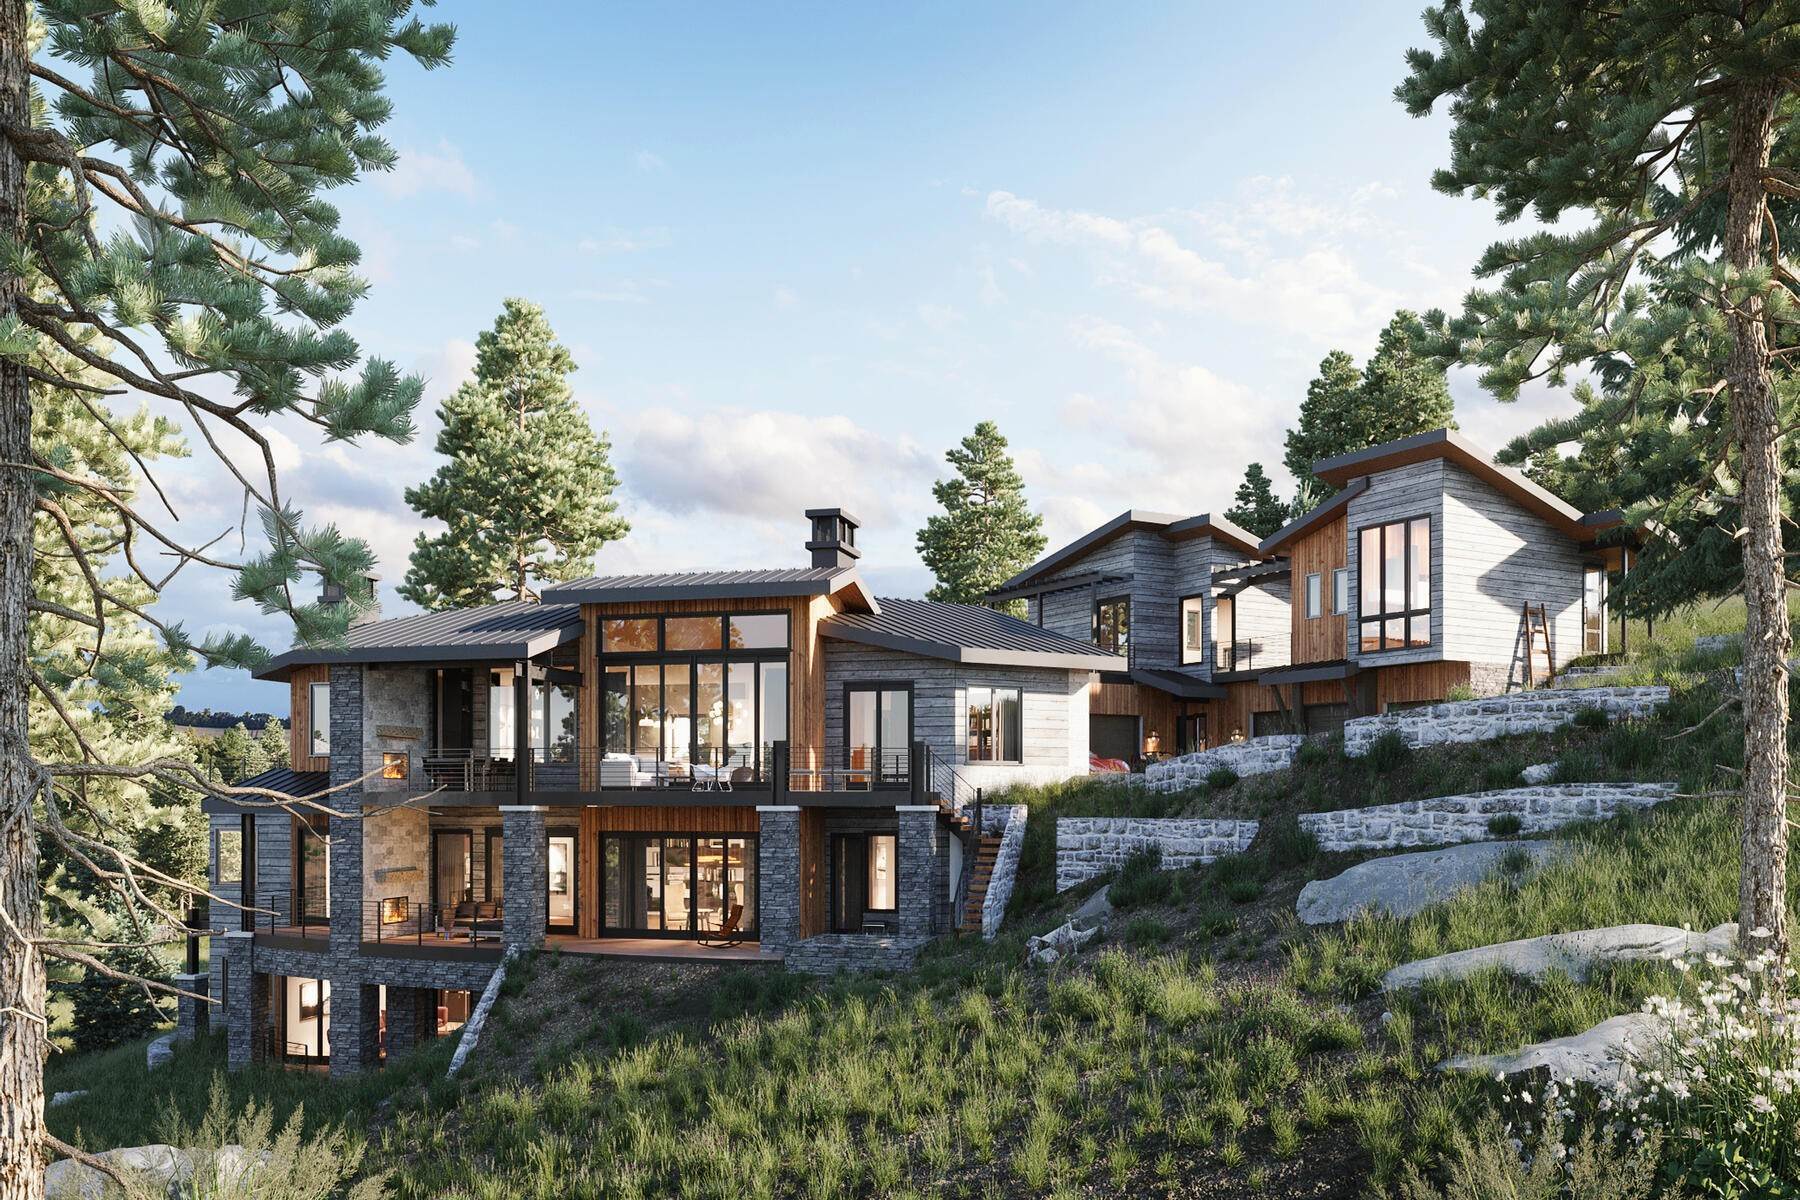 Single Family Homes for Sale at Stunning Design Merged With Elevated Mountain Views Overlooking Promontory 9319 Golden Spike Ct Park City, Utah 84098 United States